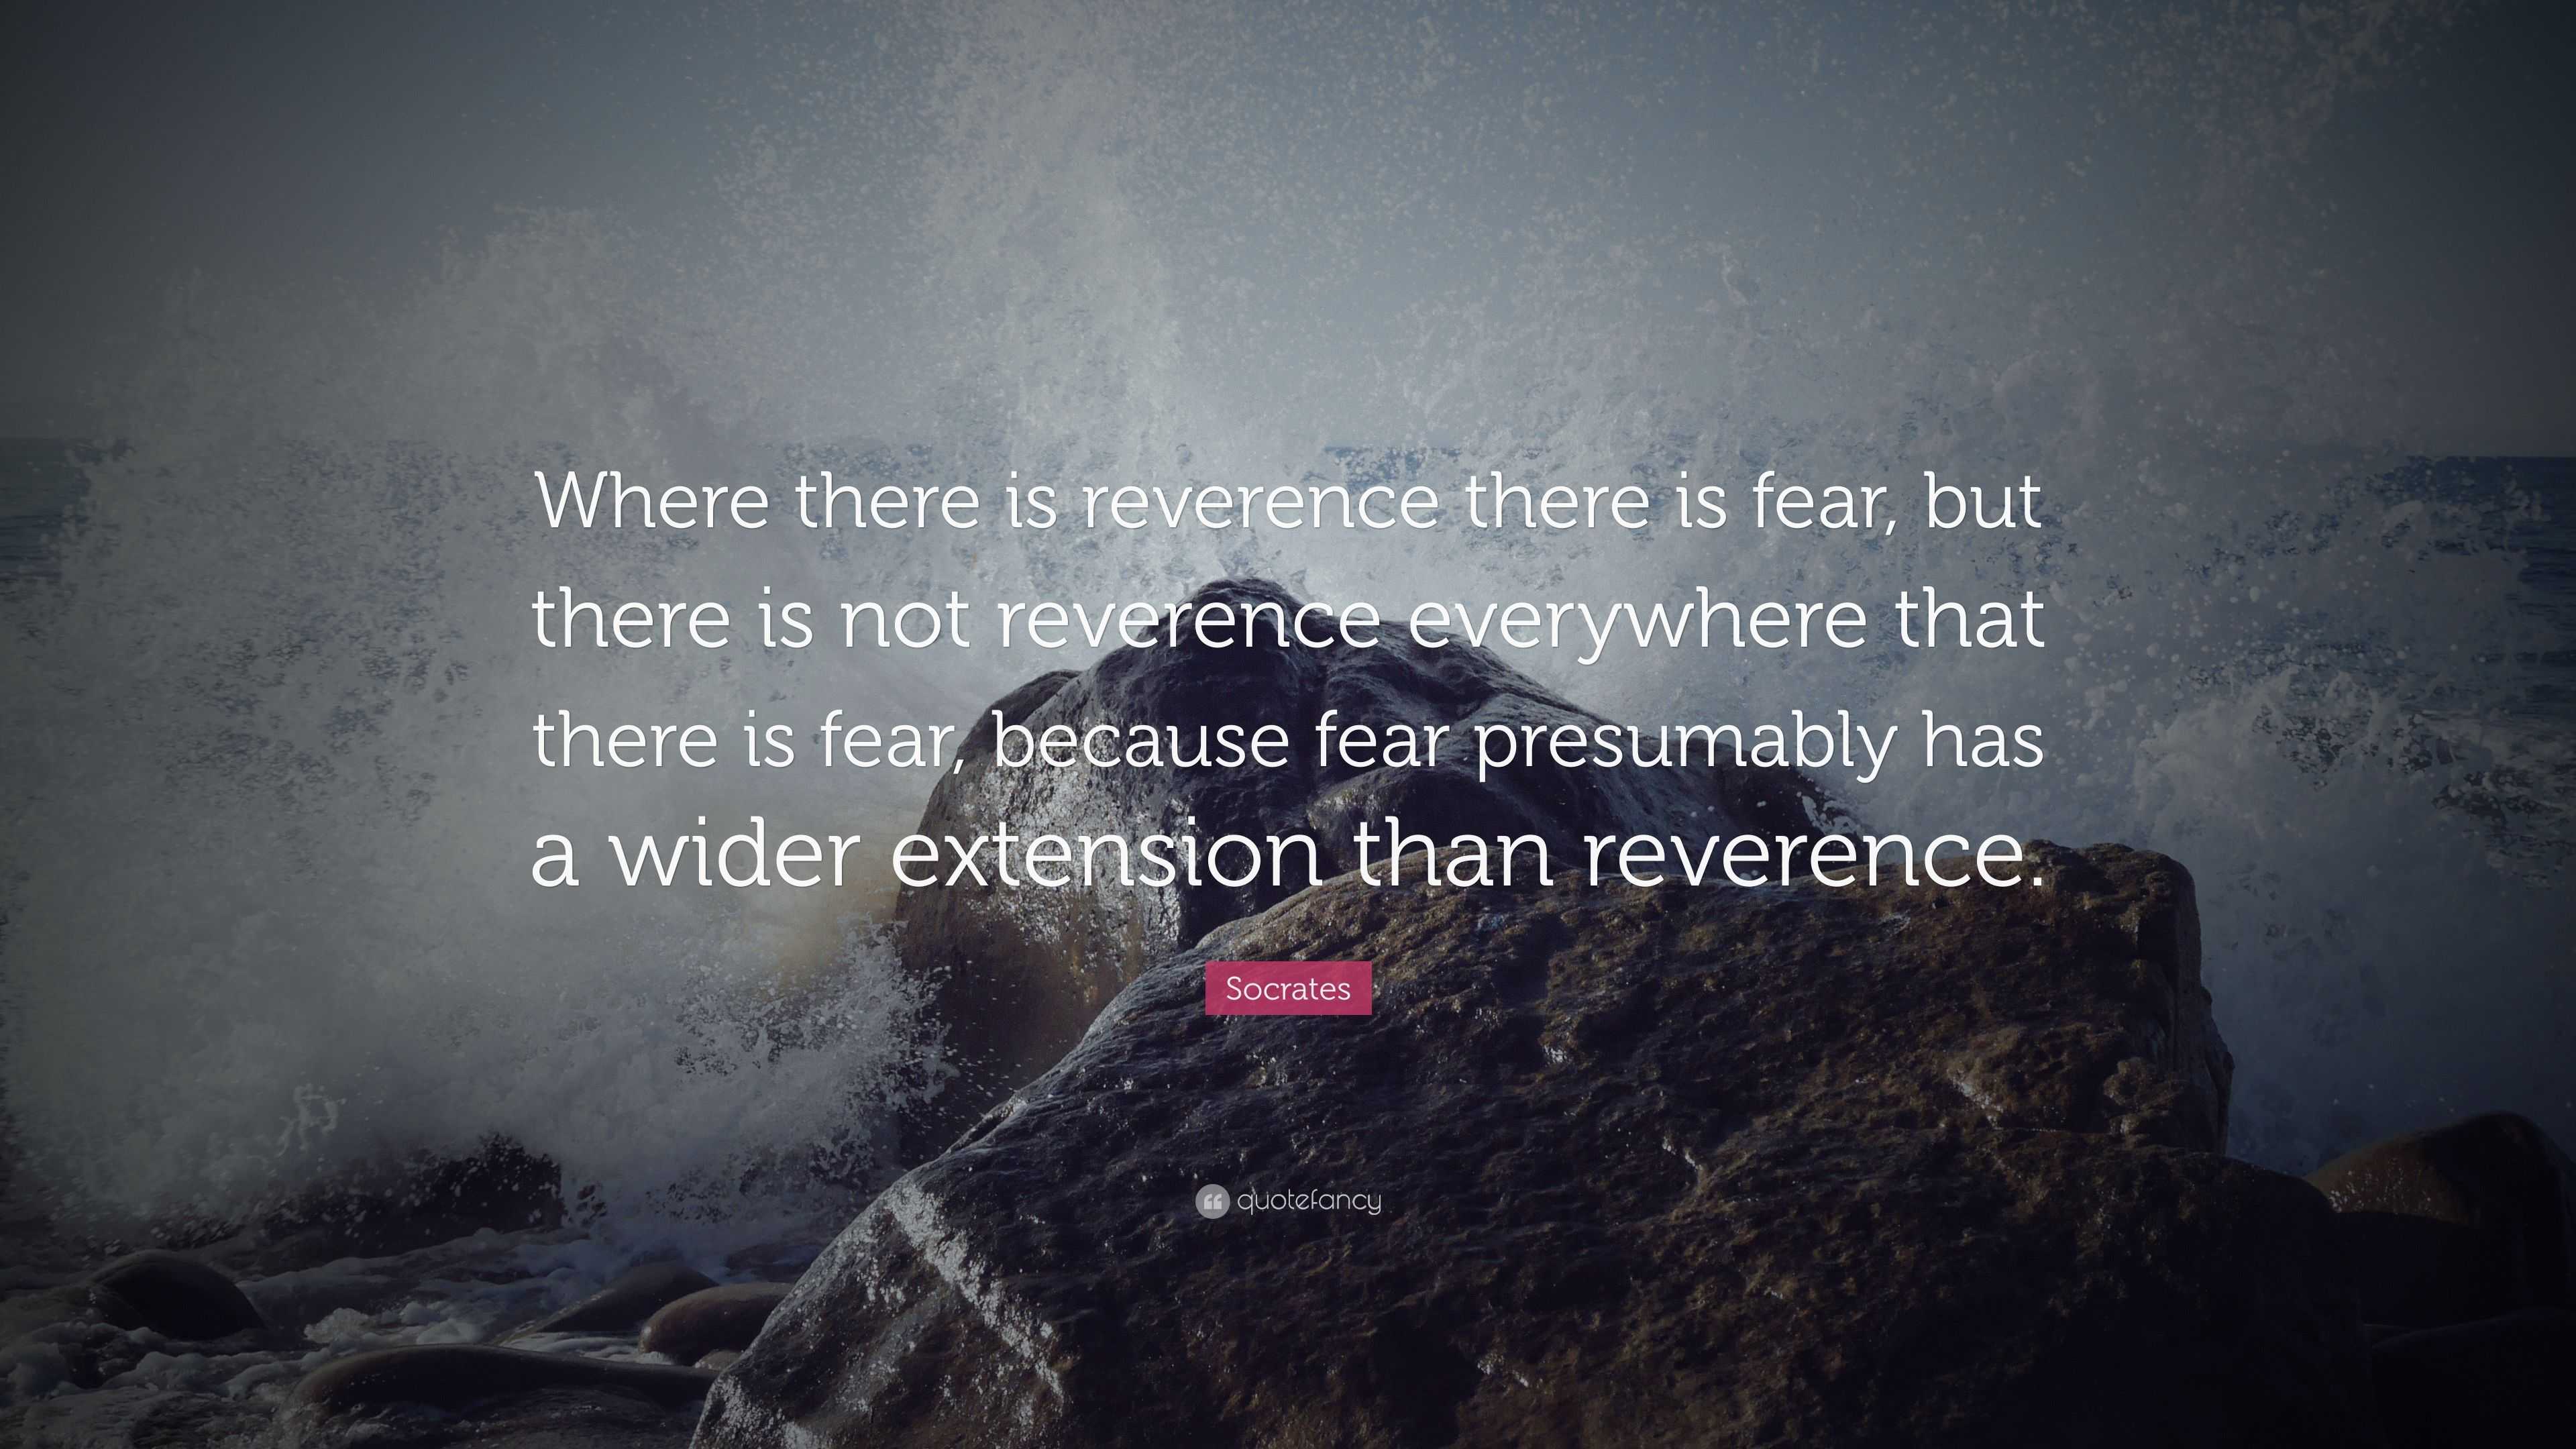 Socrates Quote: “Where there is reverence there is fear, but there is ...